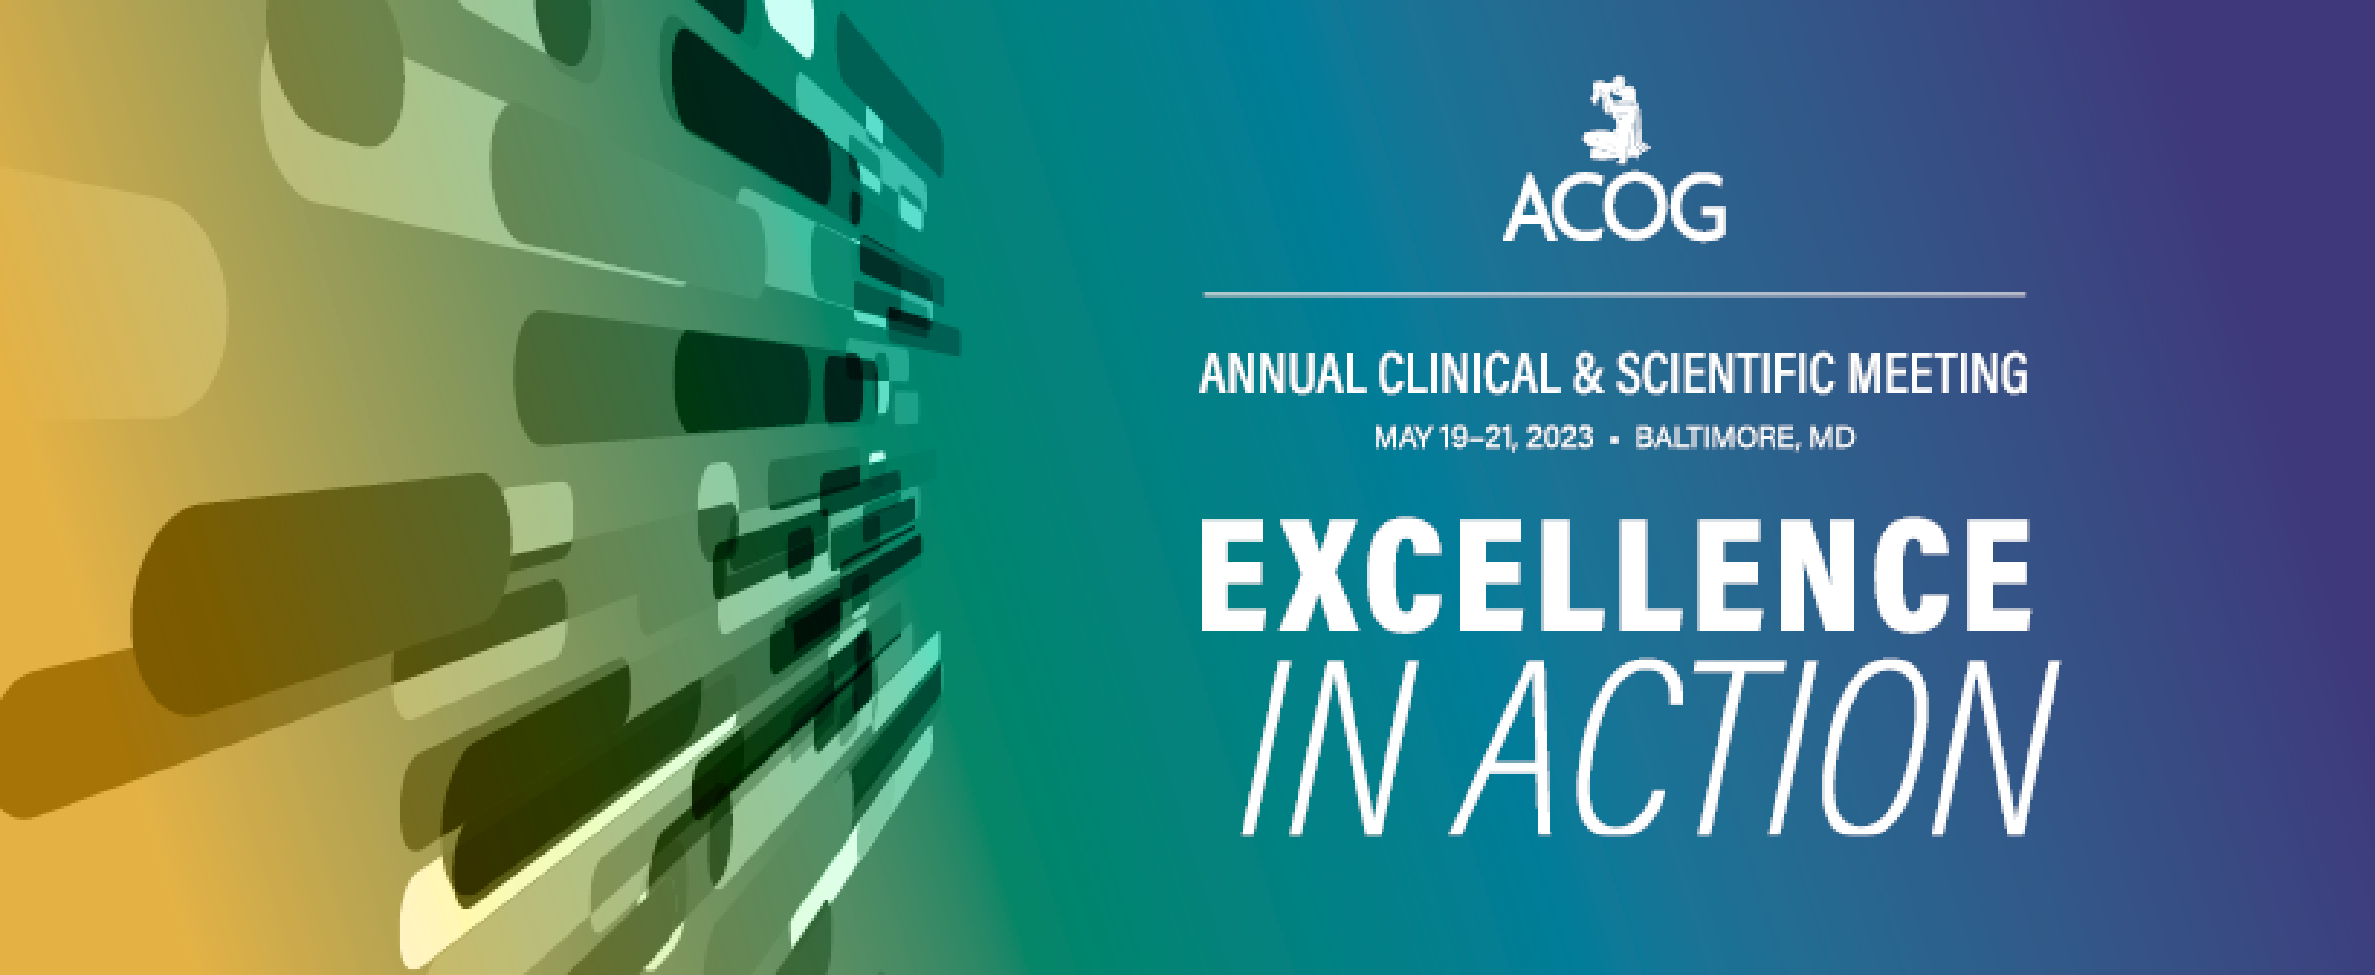 American College of Obstetricians and Gynecologists Annual Clinical & Scientific Meeting - ACOG 2023